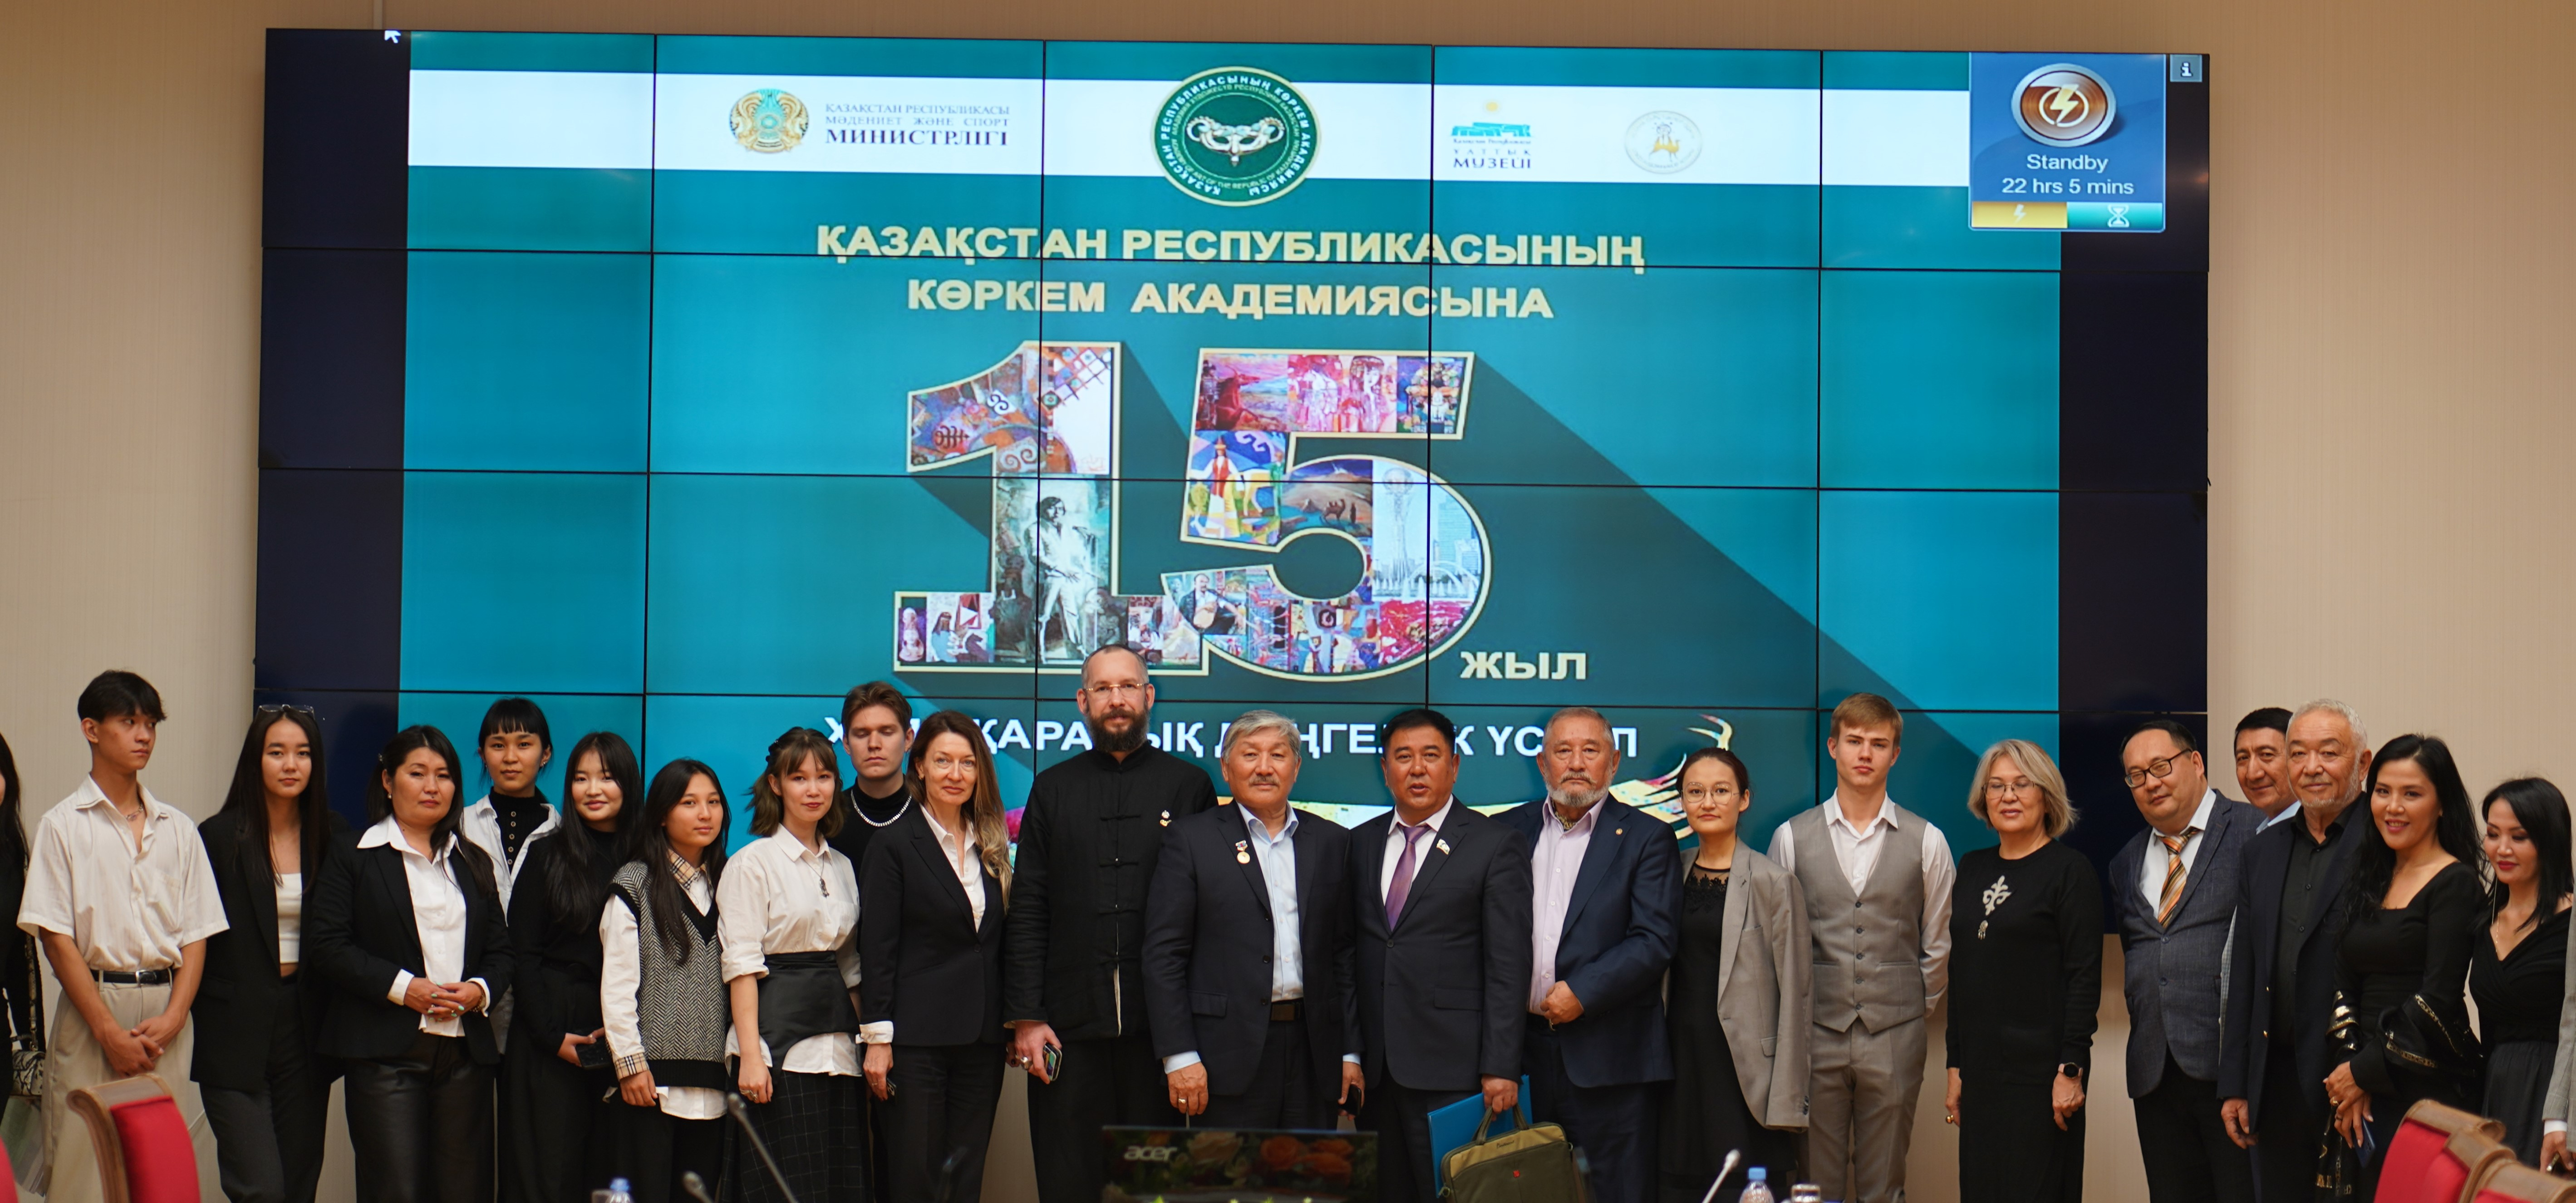 On October 20, the National Museum of the Republic of Kazakhstan hosted an international exhibition dedicated to the 15th anniversary of the Art Academy of the Republic of Kazakhstan